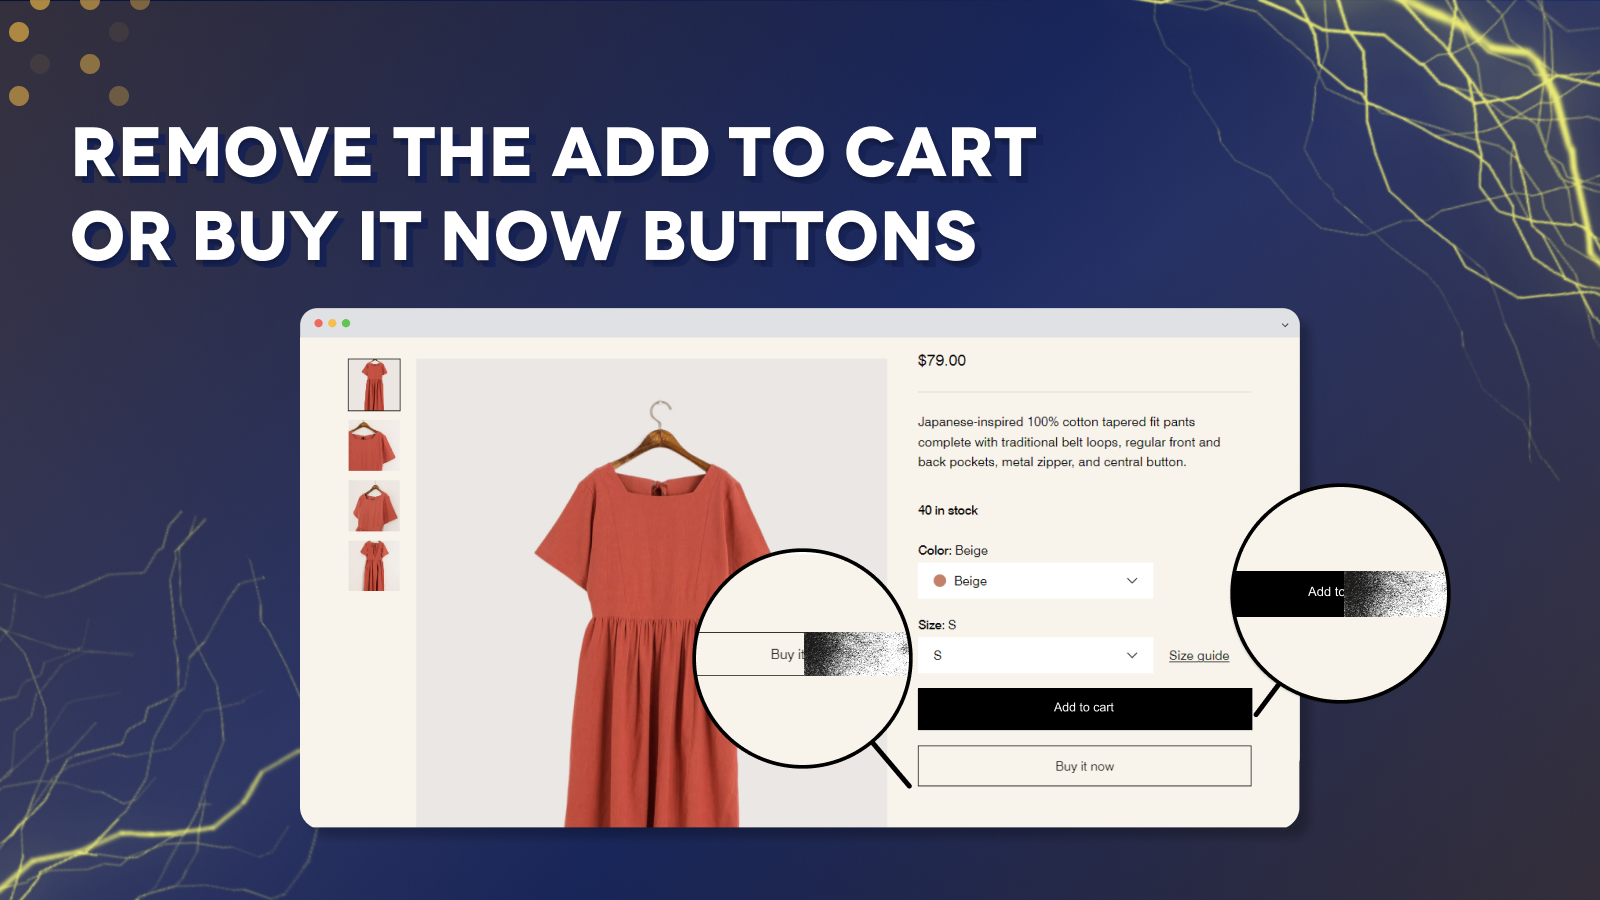 The remove add to cart / buy it now feature in the product page